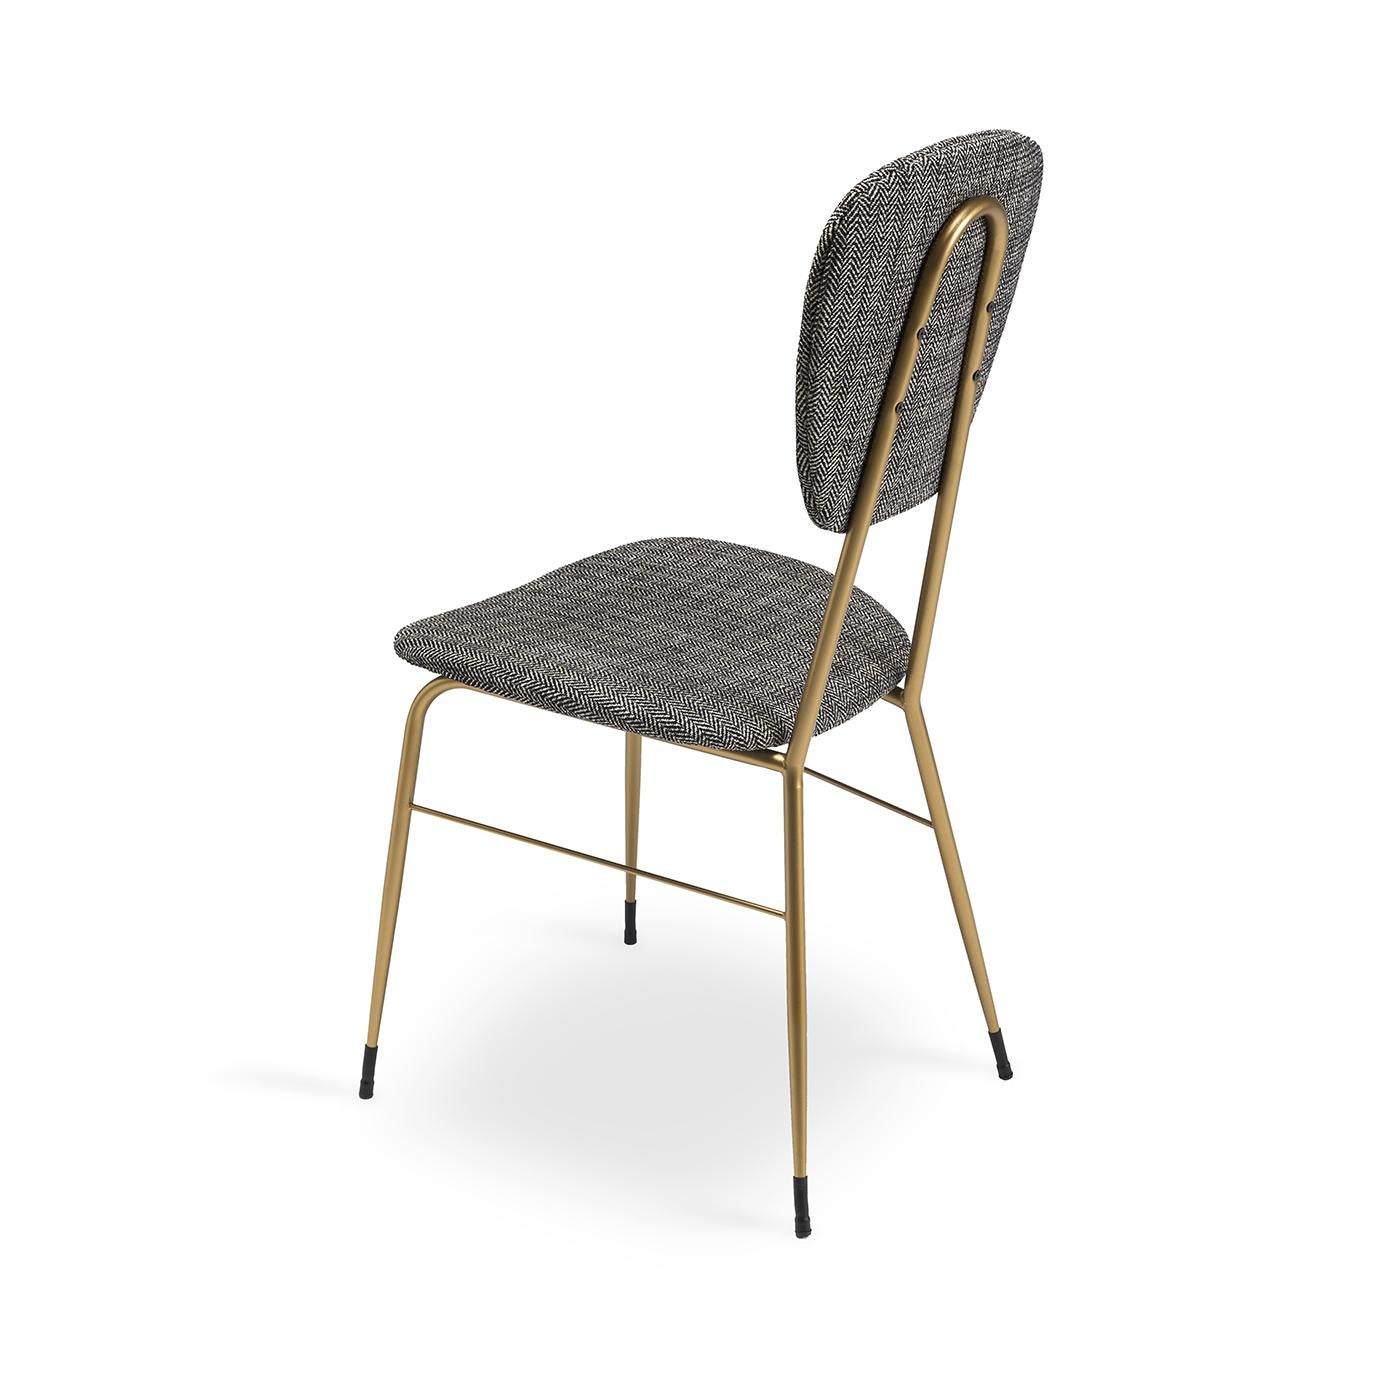 Give your dining table space a bit of a vintage feel with this cute little dining chair. The simple metal frame and legs are finished in a matte brass finish, with decorative black metal chair guides at the bottoms of the legs. The back and seat,